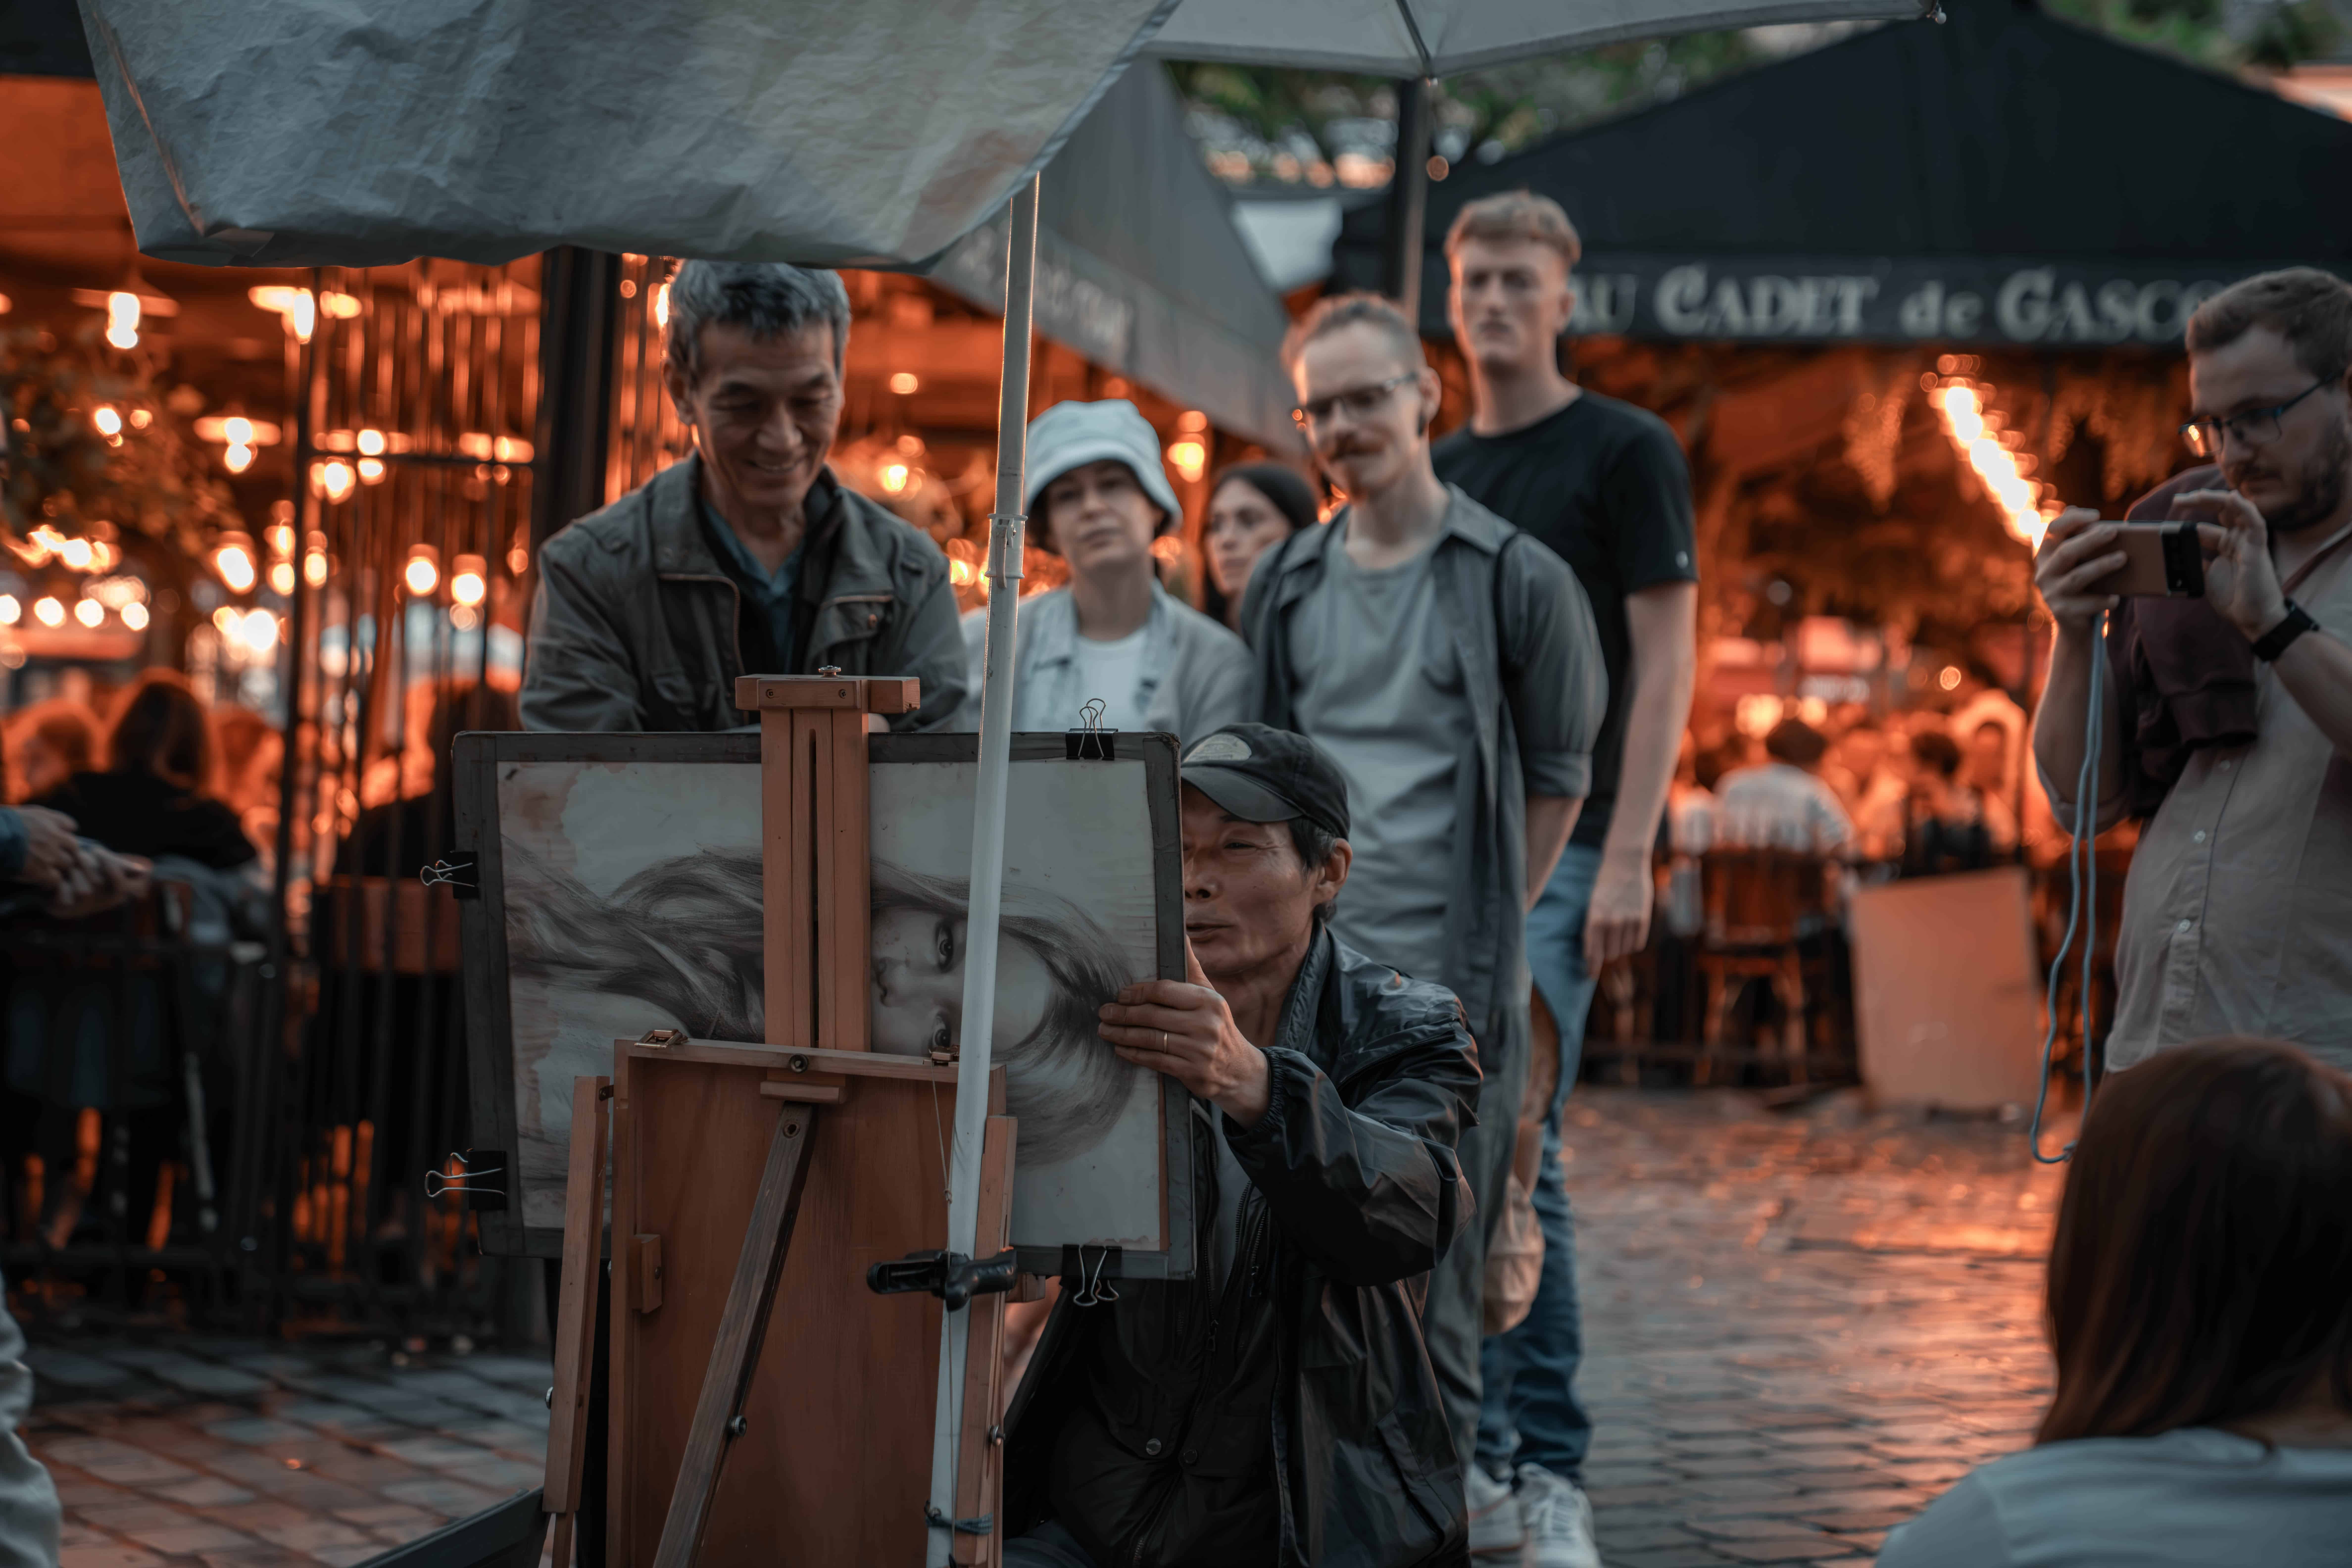 People watching an artist paint a painting in Paris